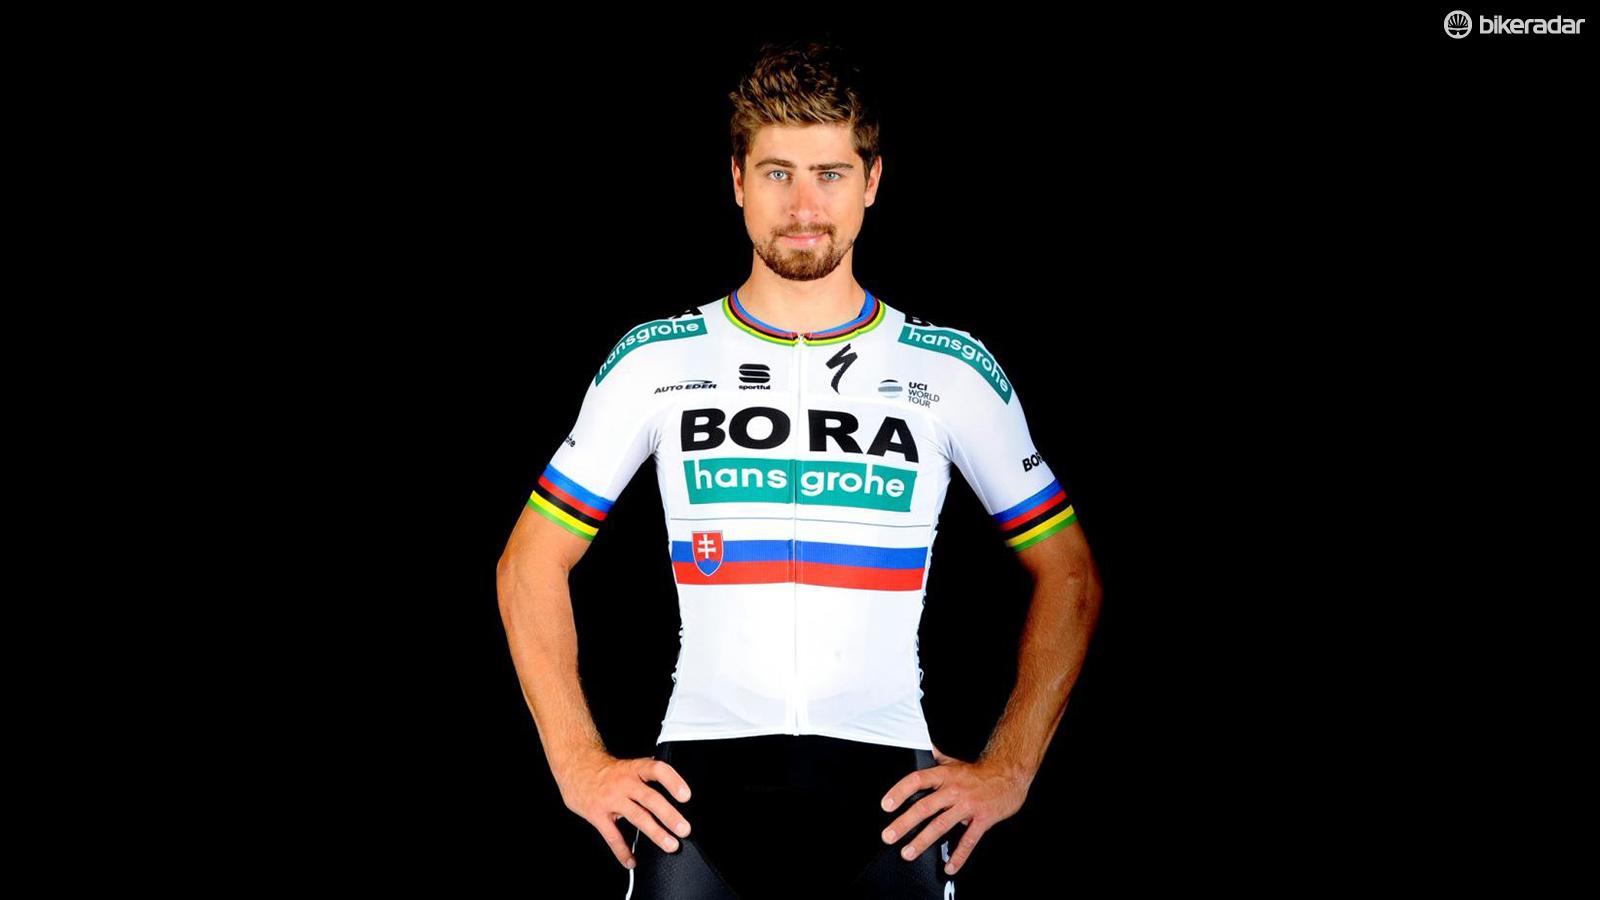 Peter Sagan reveals new jersey after three years in rainbow stripes ...